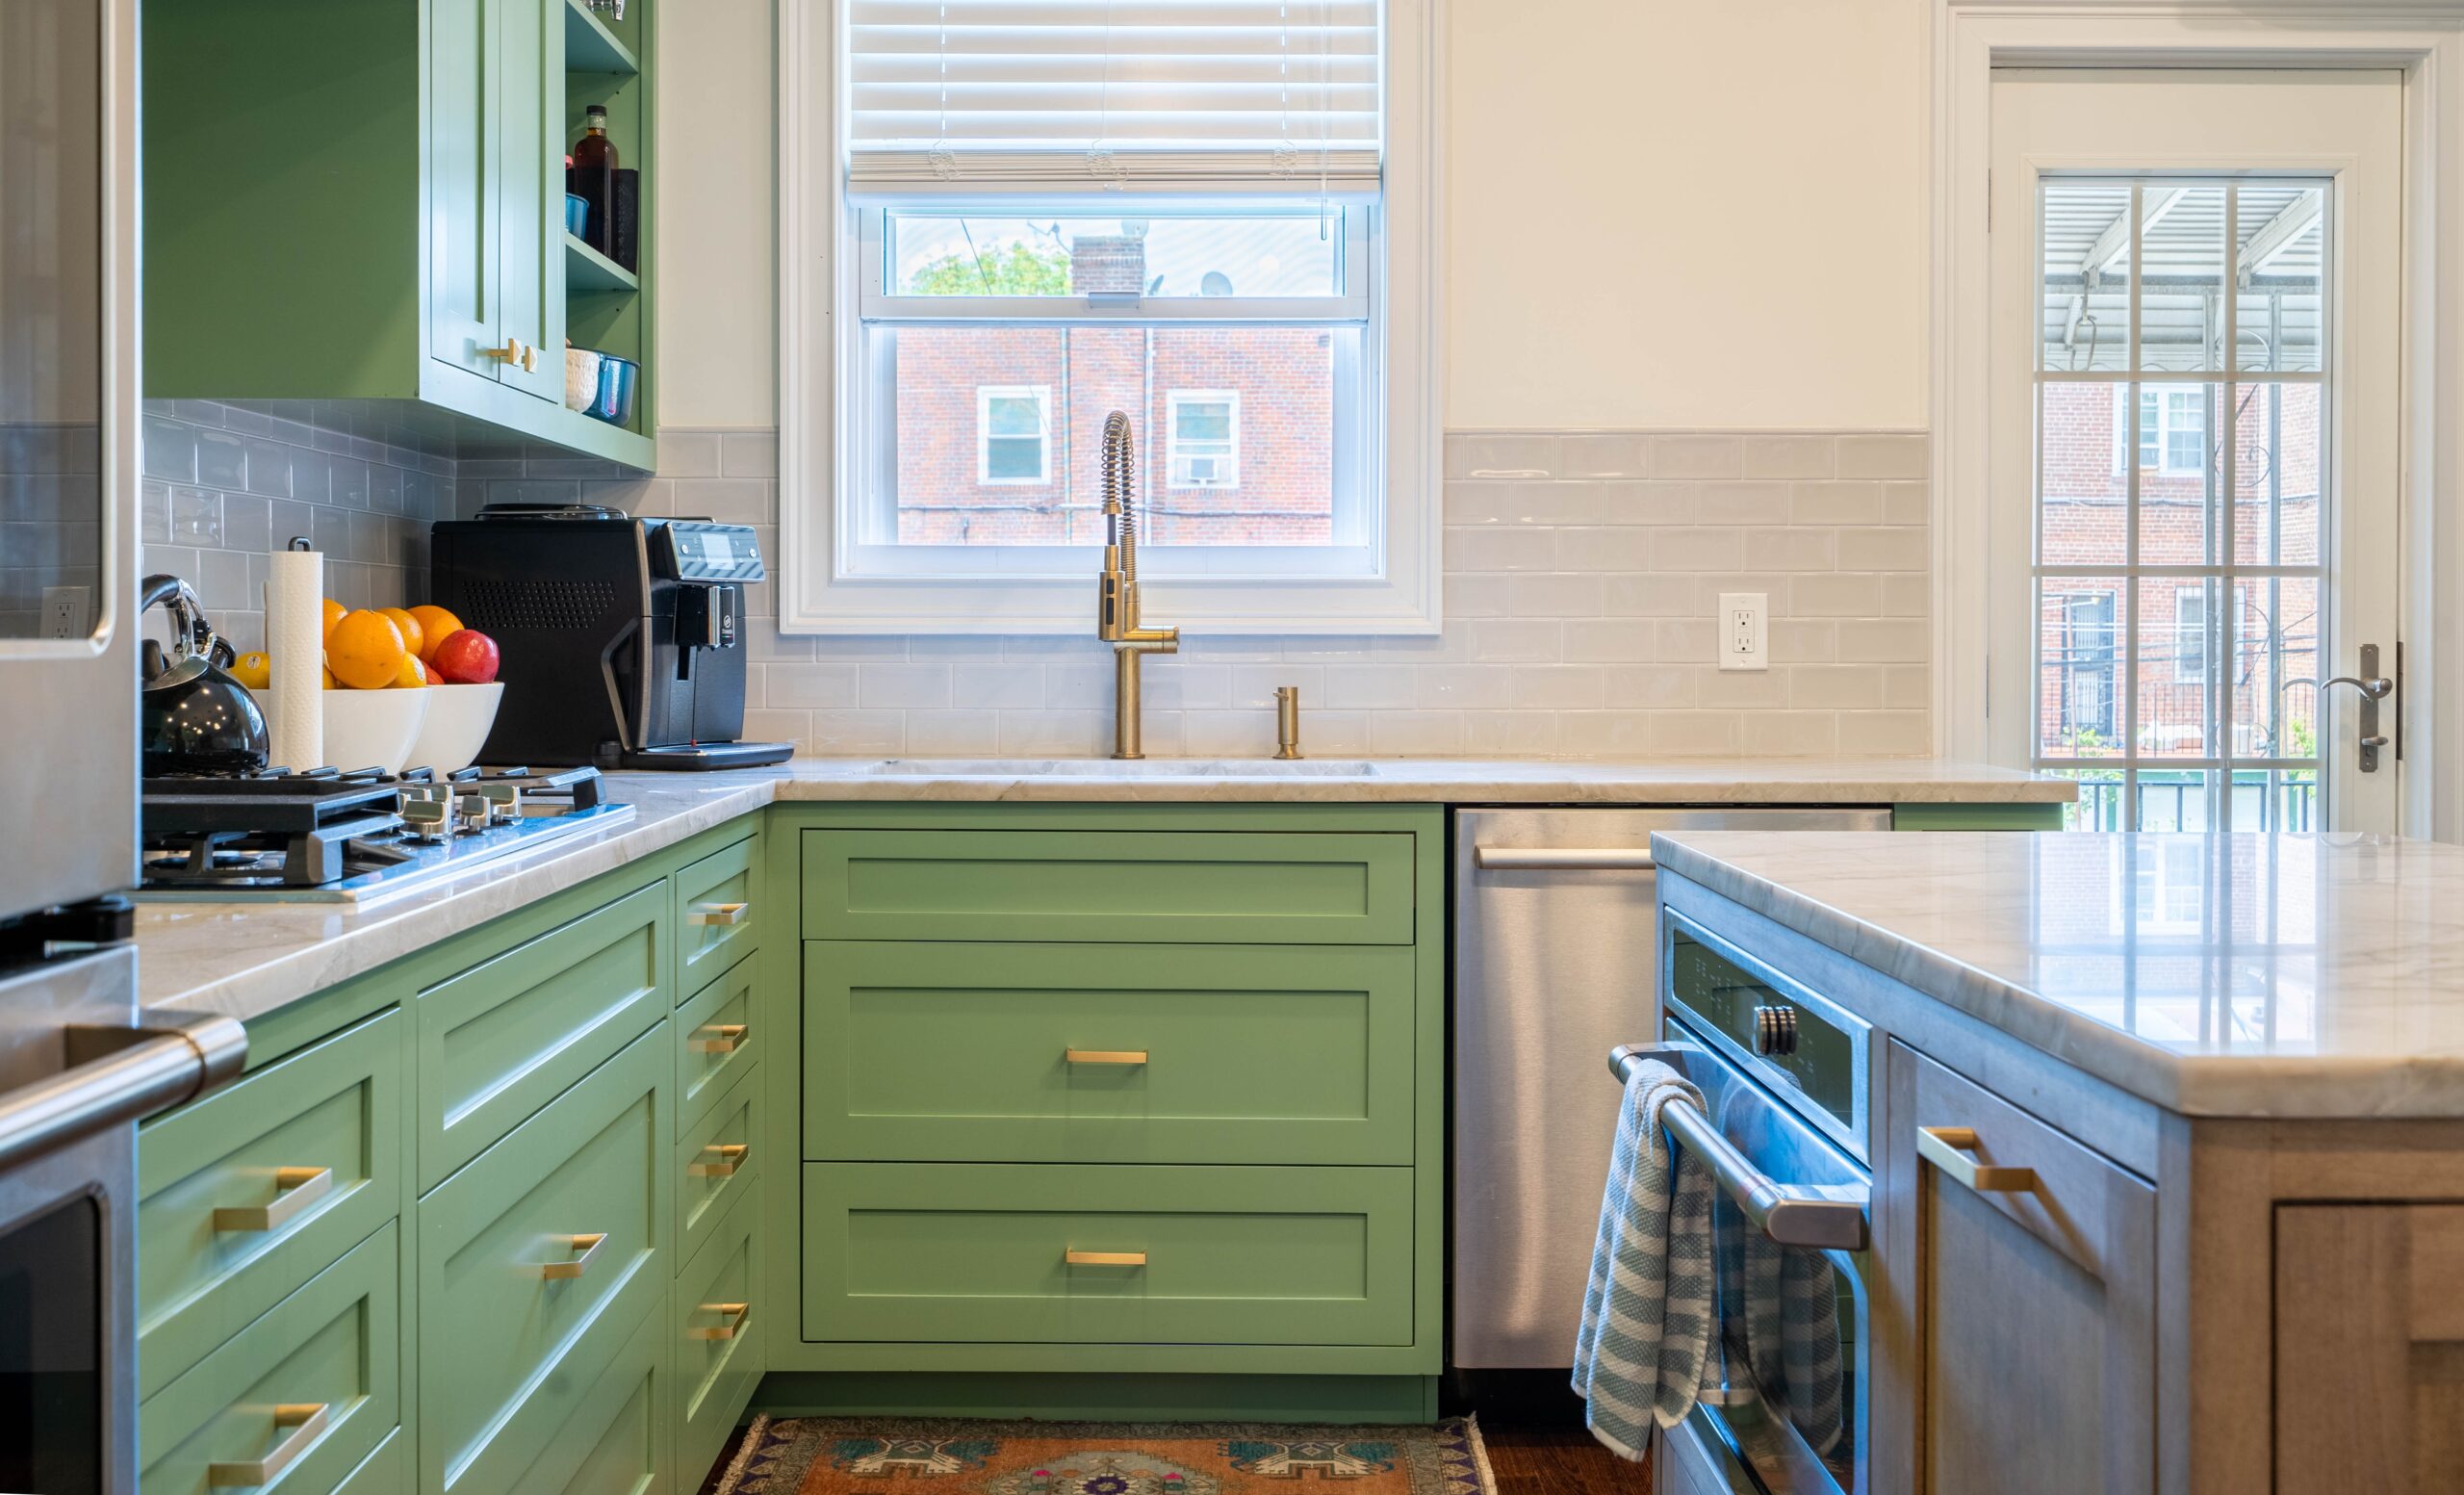 We'll see bold color choices like green as a kitchen trend in 2024. Pictured: A kitchen with green cabinetry.